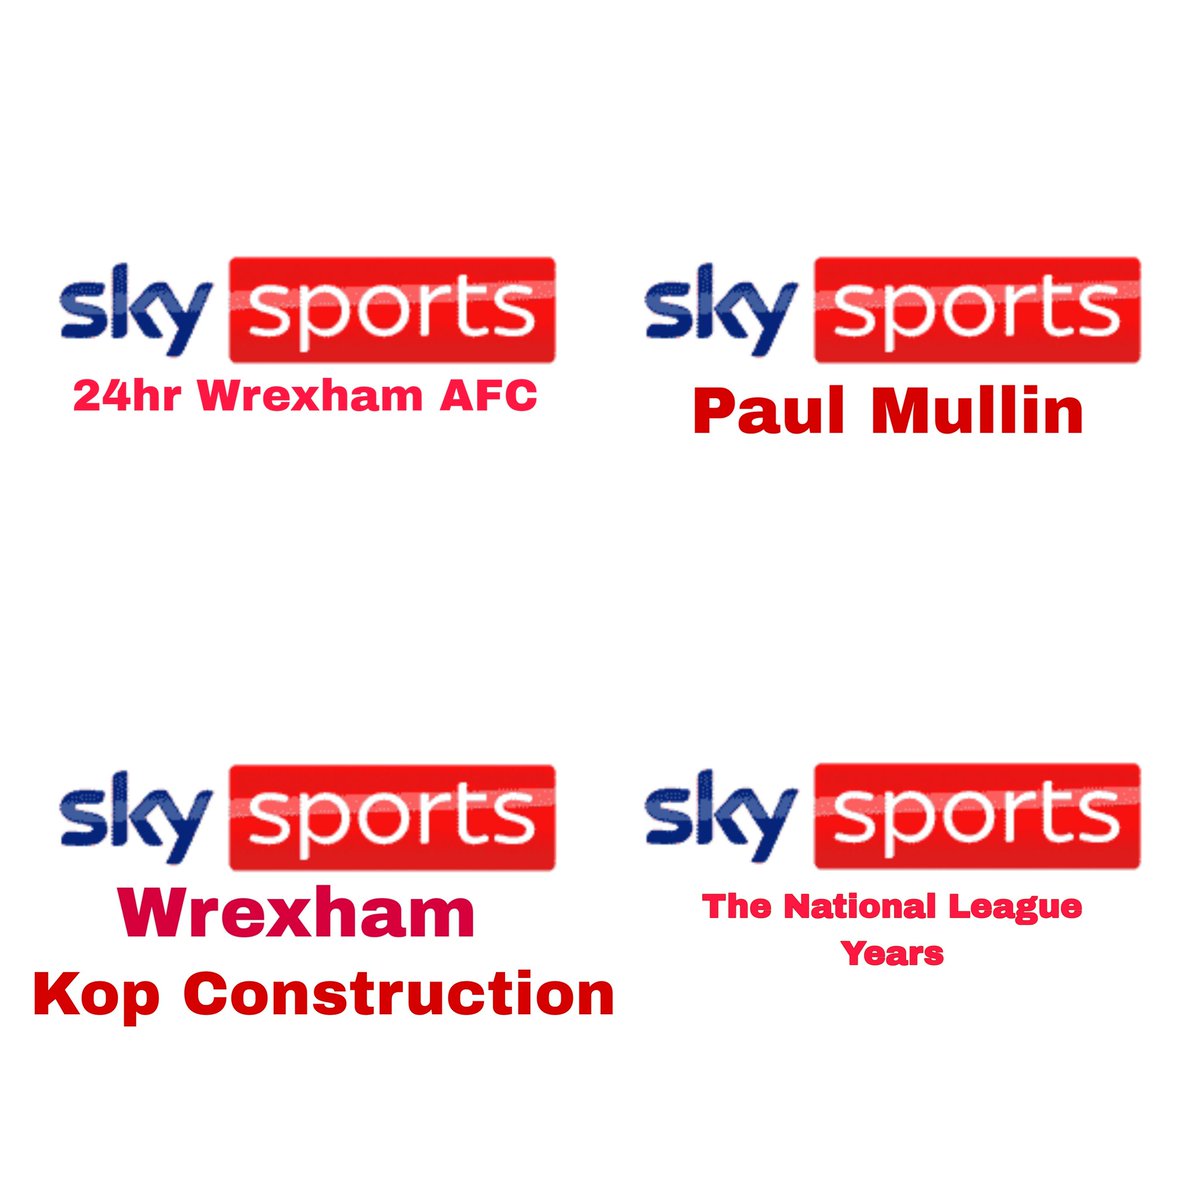 Sky sports to announce new channels today!